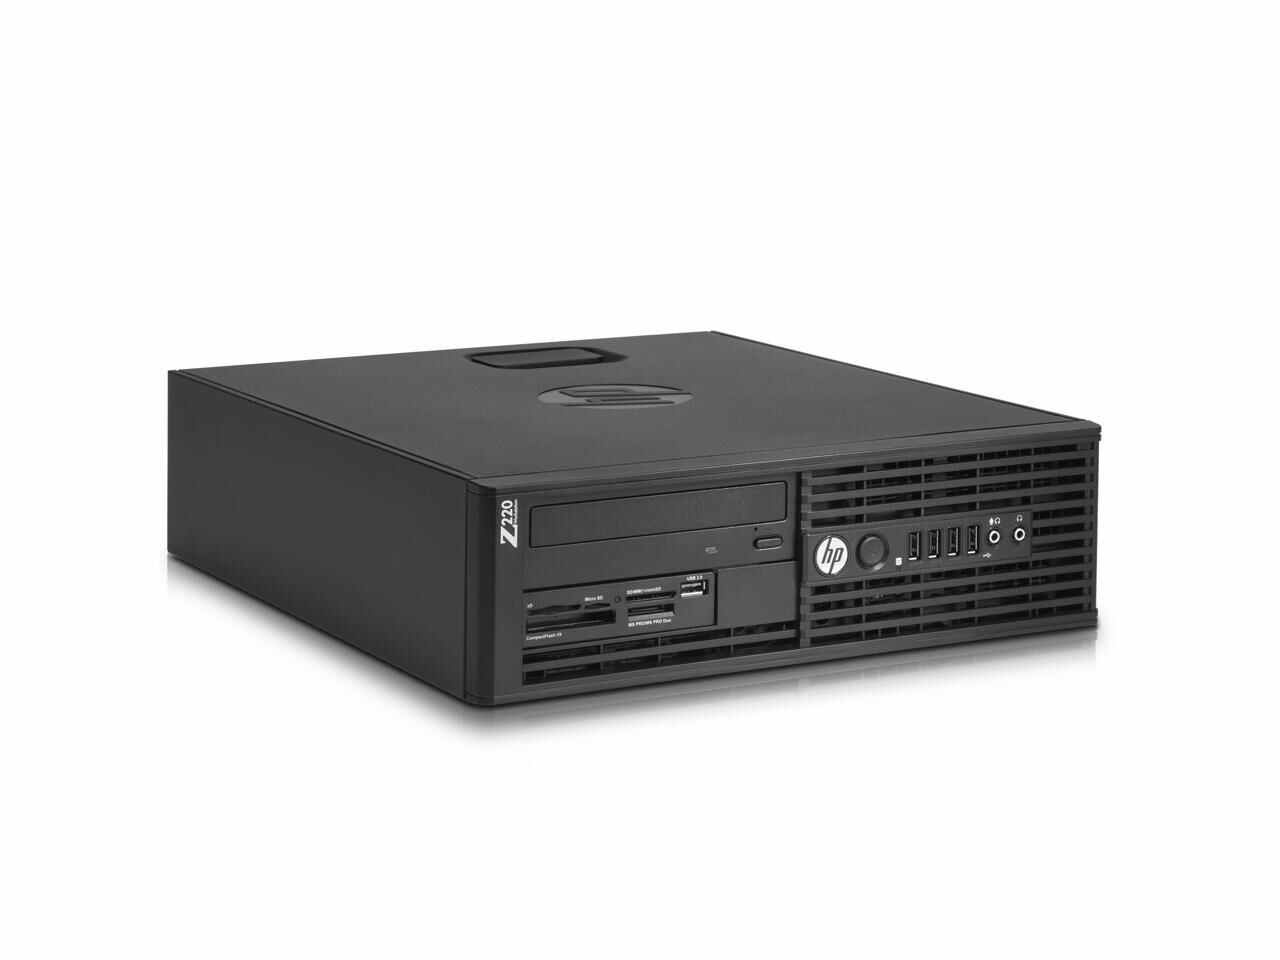 HP Workstation Z220 Desktop - Core i7 (3770) 3.4GHz Quad Core CPU - 256GB SSD - 16GB RAM - DVD - Windows 10 Pro 64-Bit Operating System Installed - USB KB/Mouse Included